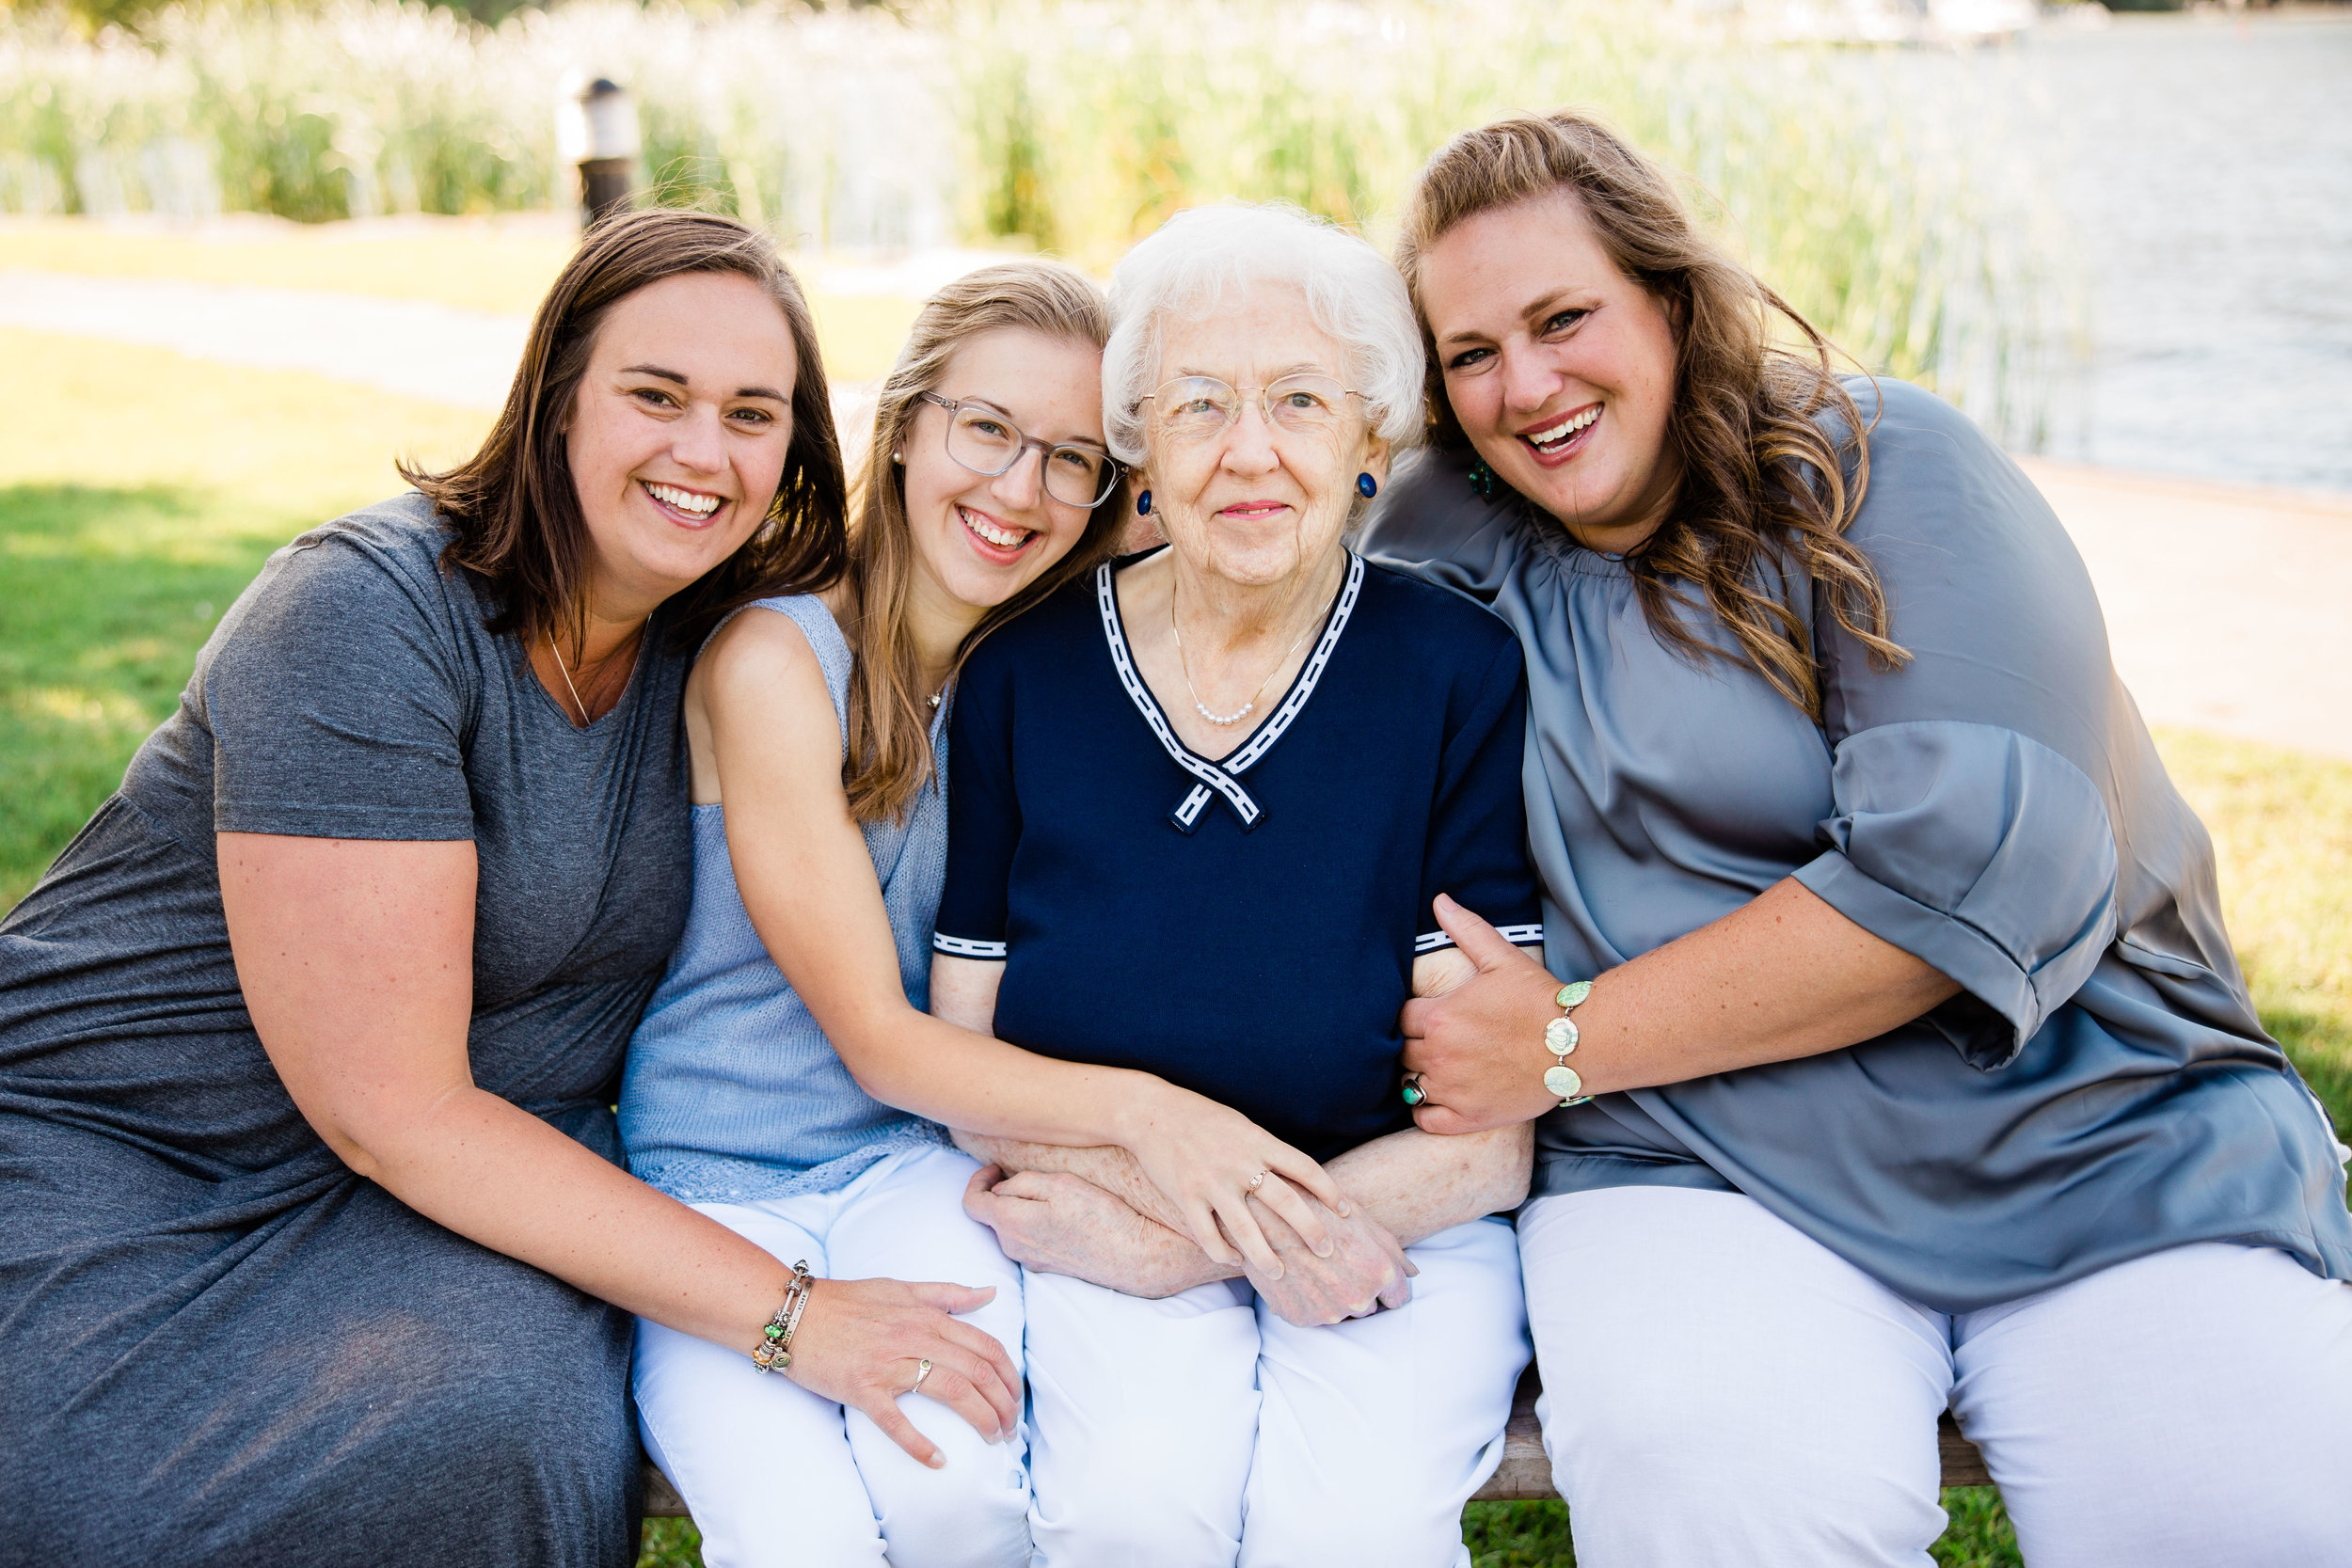 Four Generations of Women | All Over Ephraim Tandem Photography